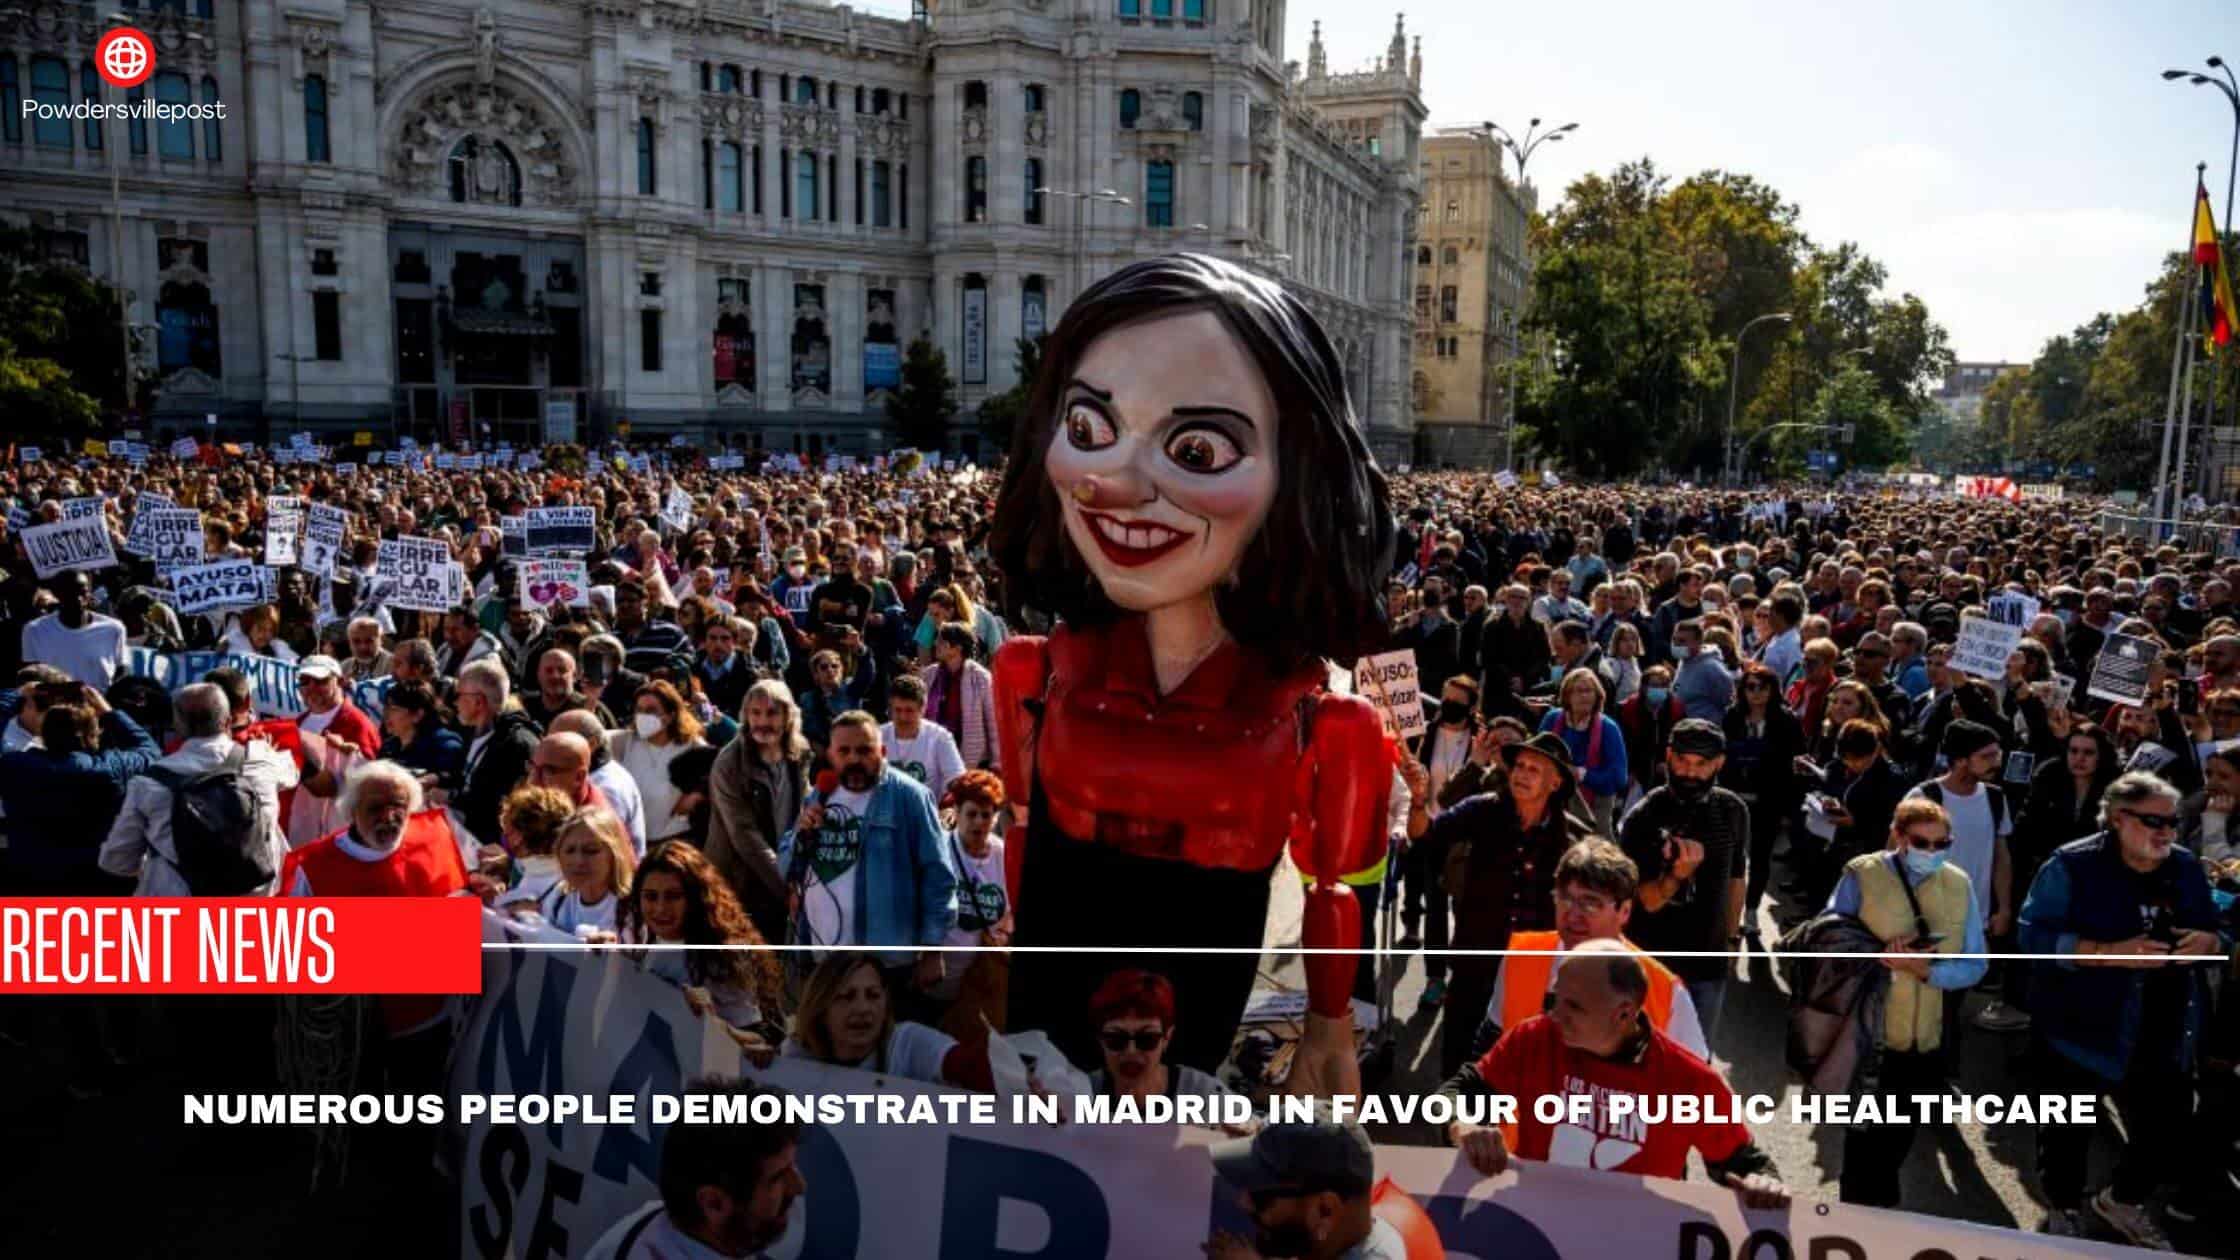 Numerous People Demonstrate In Madrid In Favour Of Public Healthcare